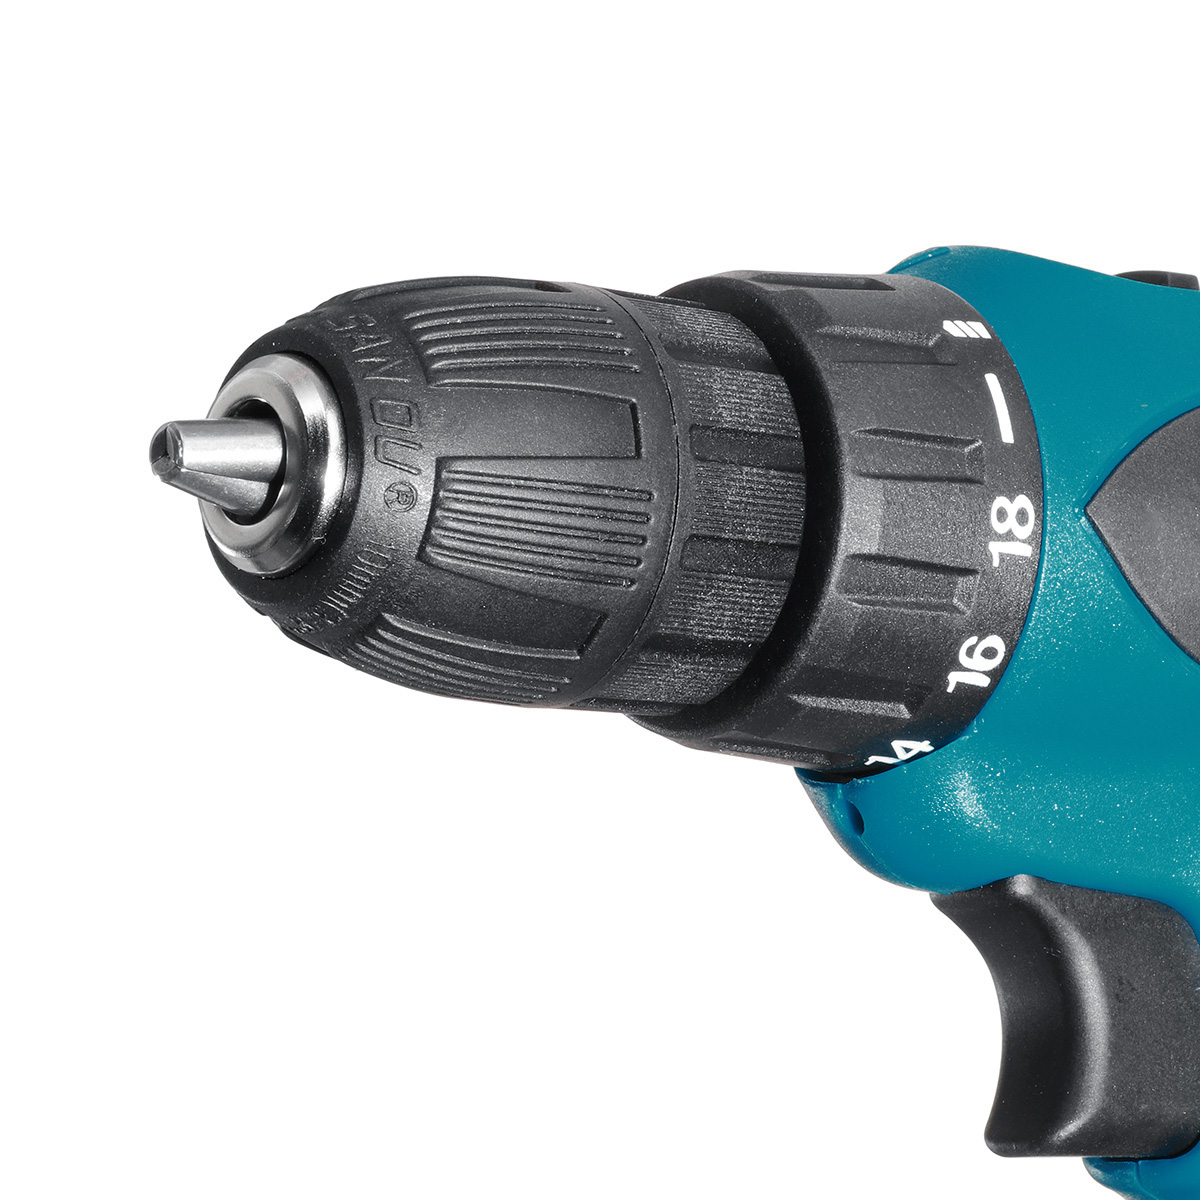 168V-Cordless-Electric-Drill-Driver-231-Torque-Multifuntional-Screwdriver-Power-Tool-W-Battery--Dril-1863336-9